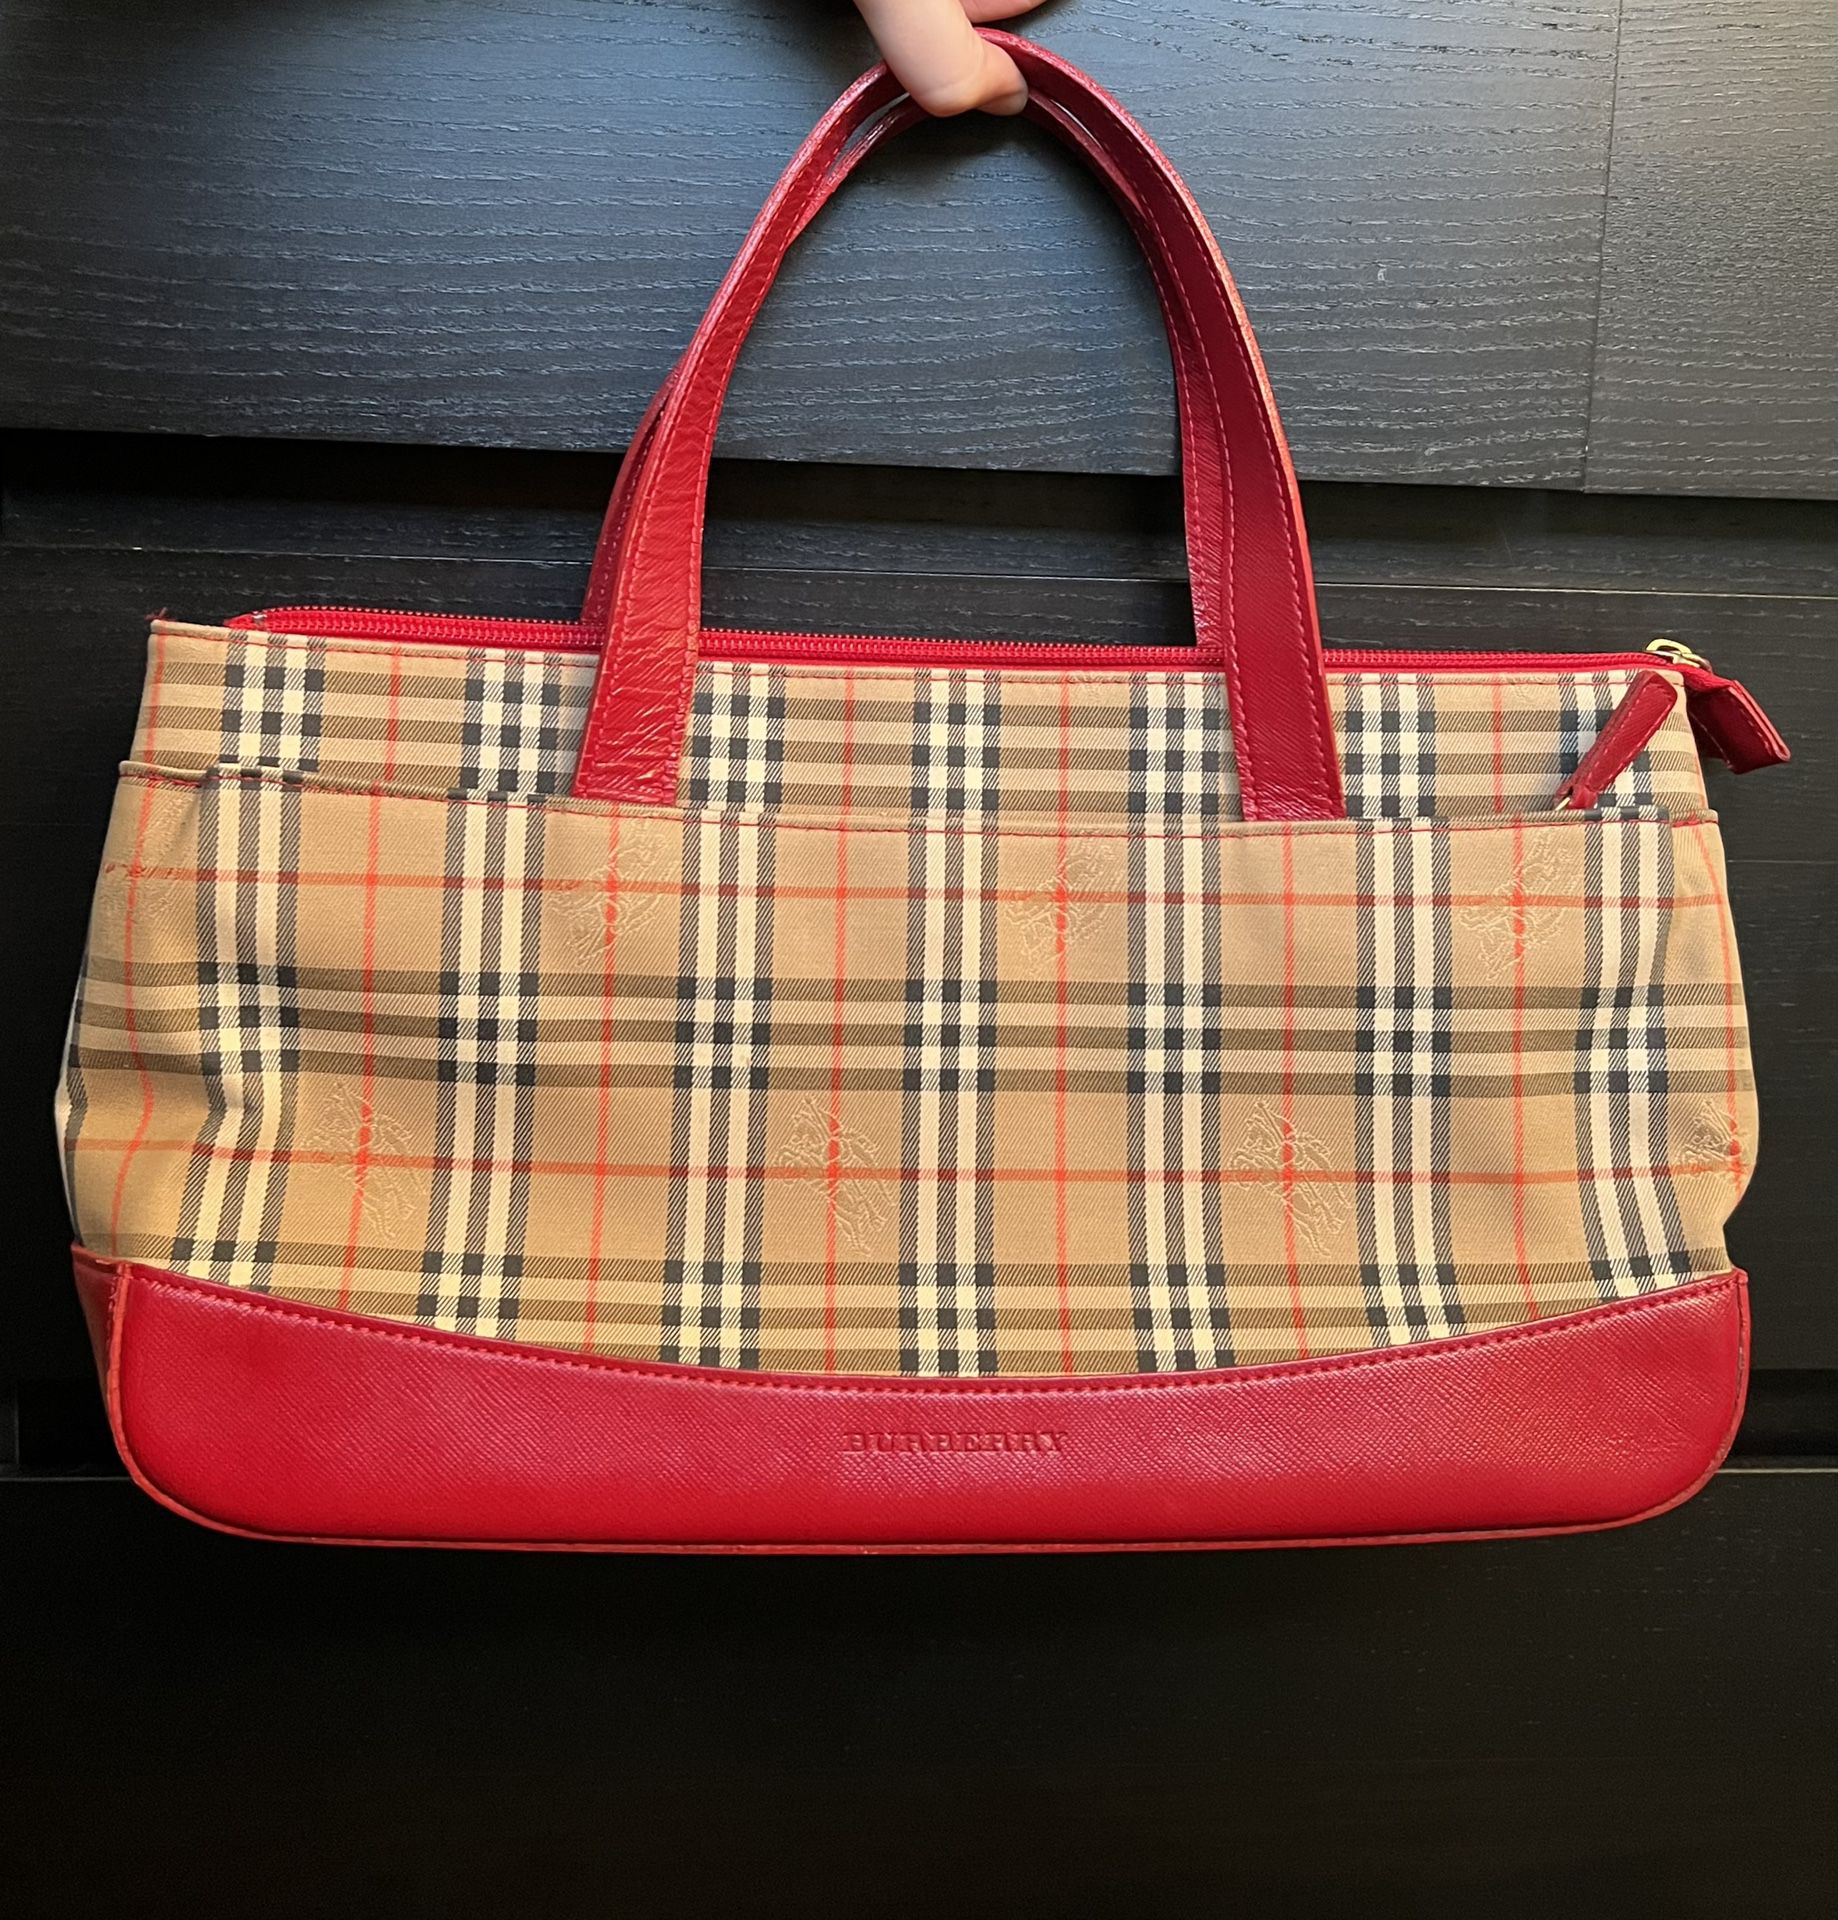 Burberry Haymarket Check Handle Bag with red saffiano leather 